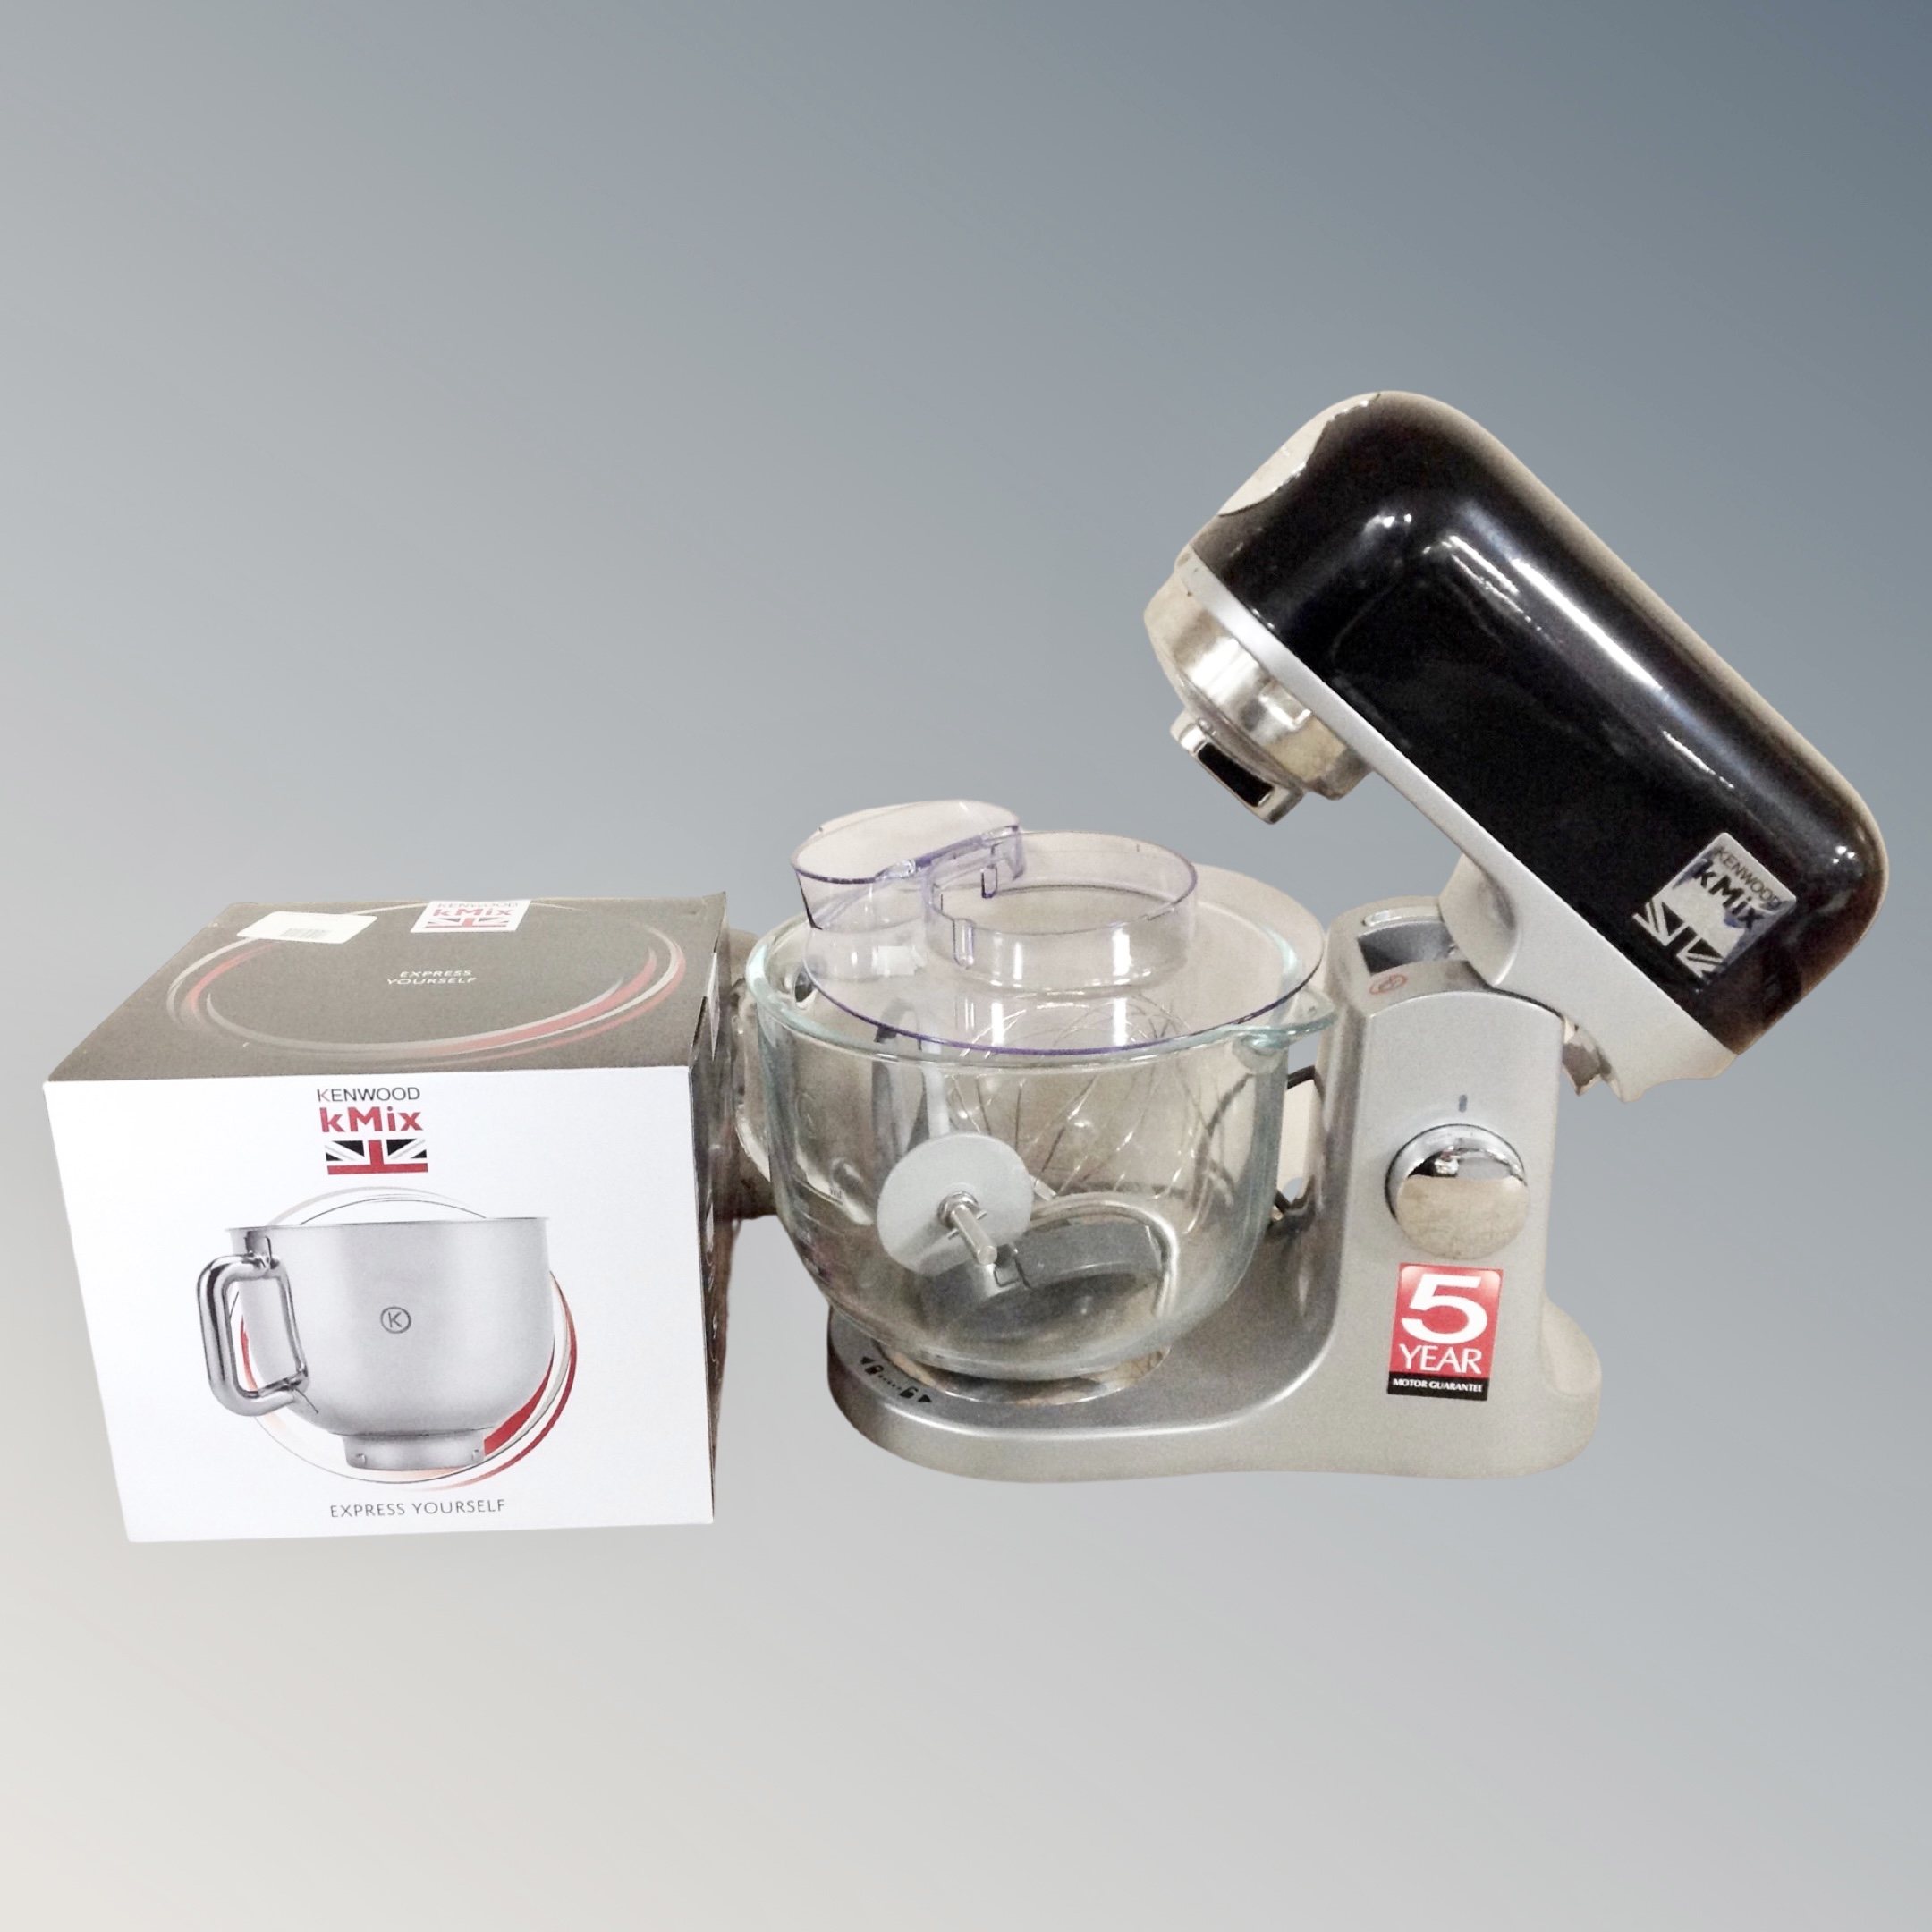 A Kenwood KMIX food mixer with accessories and boxed bowl